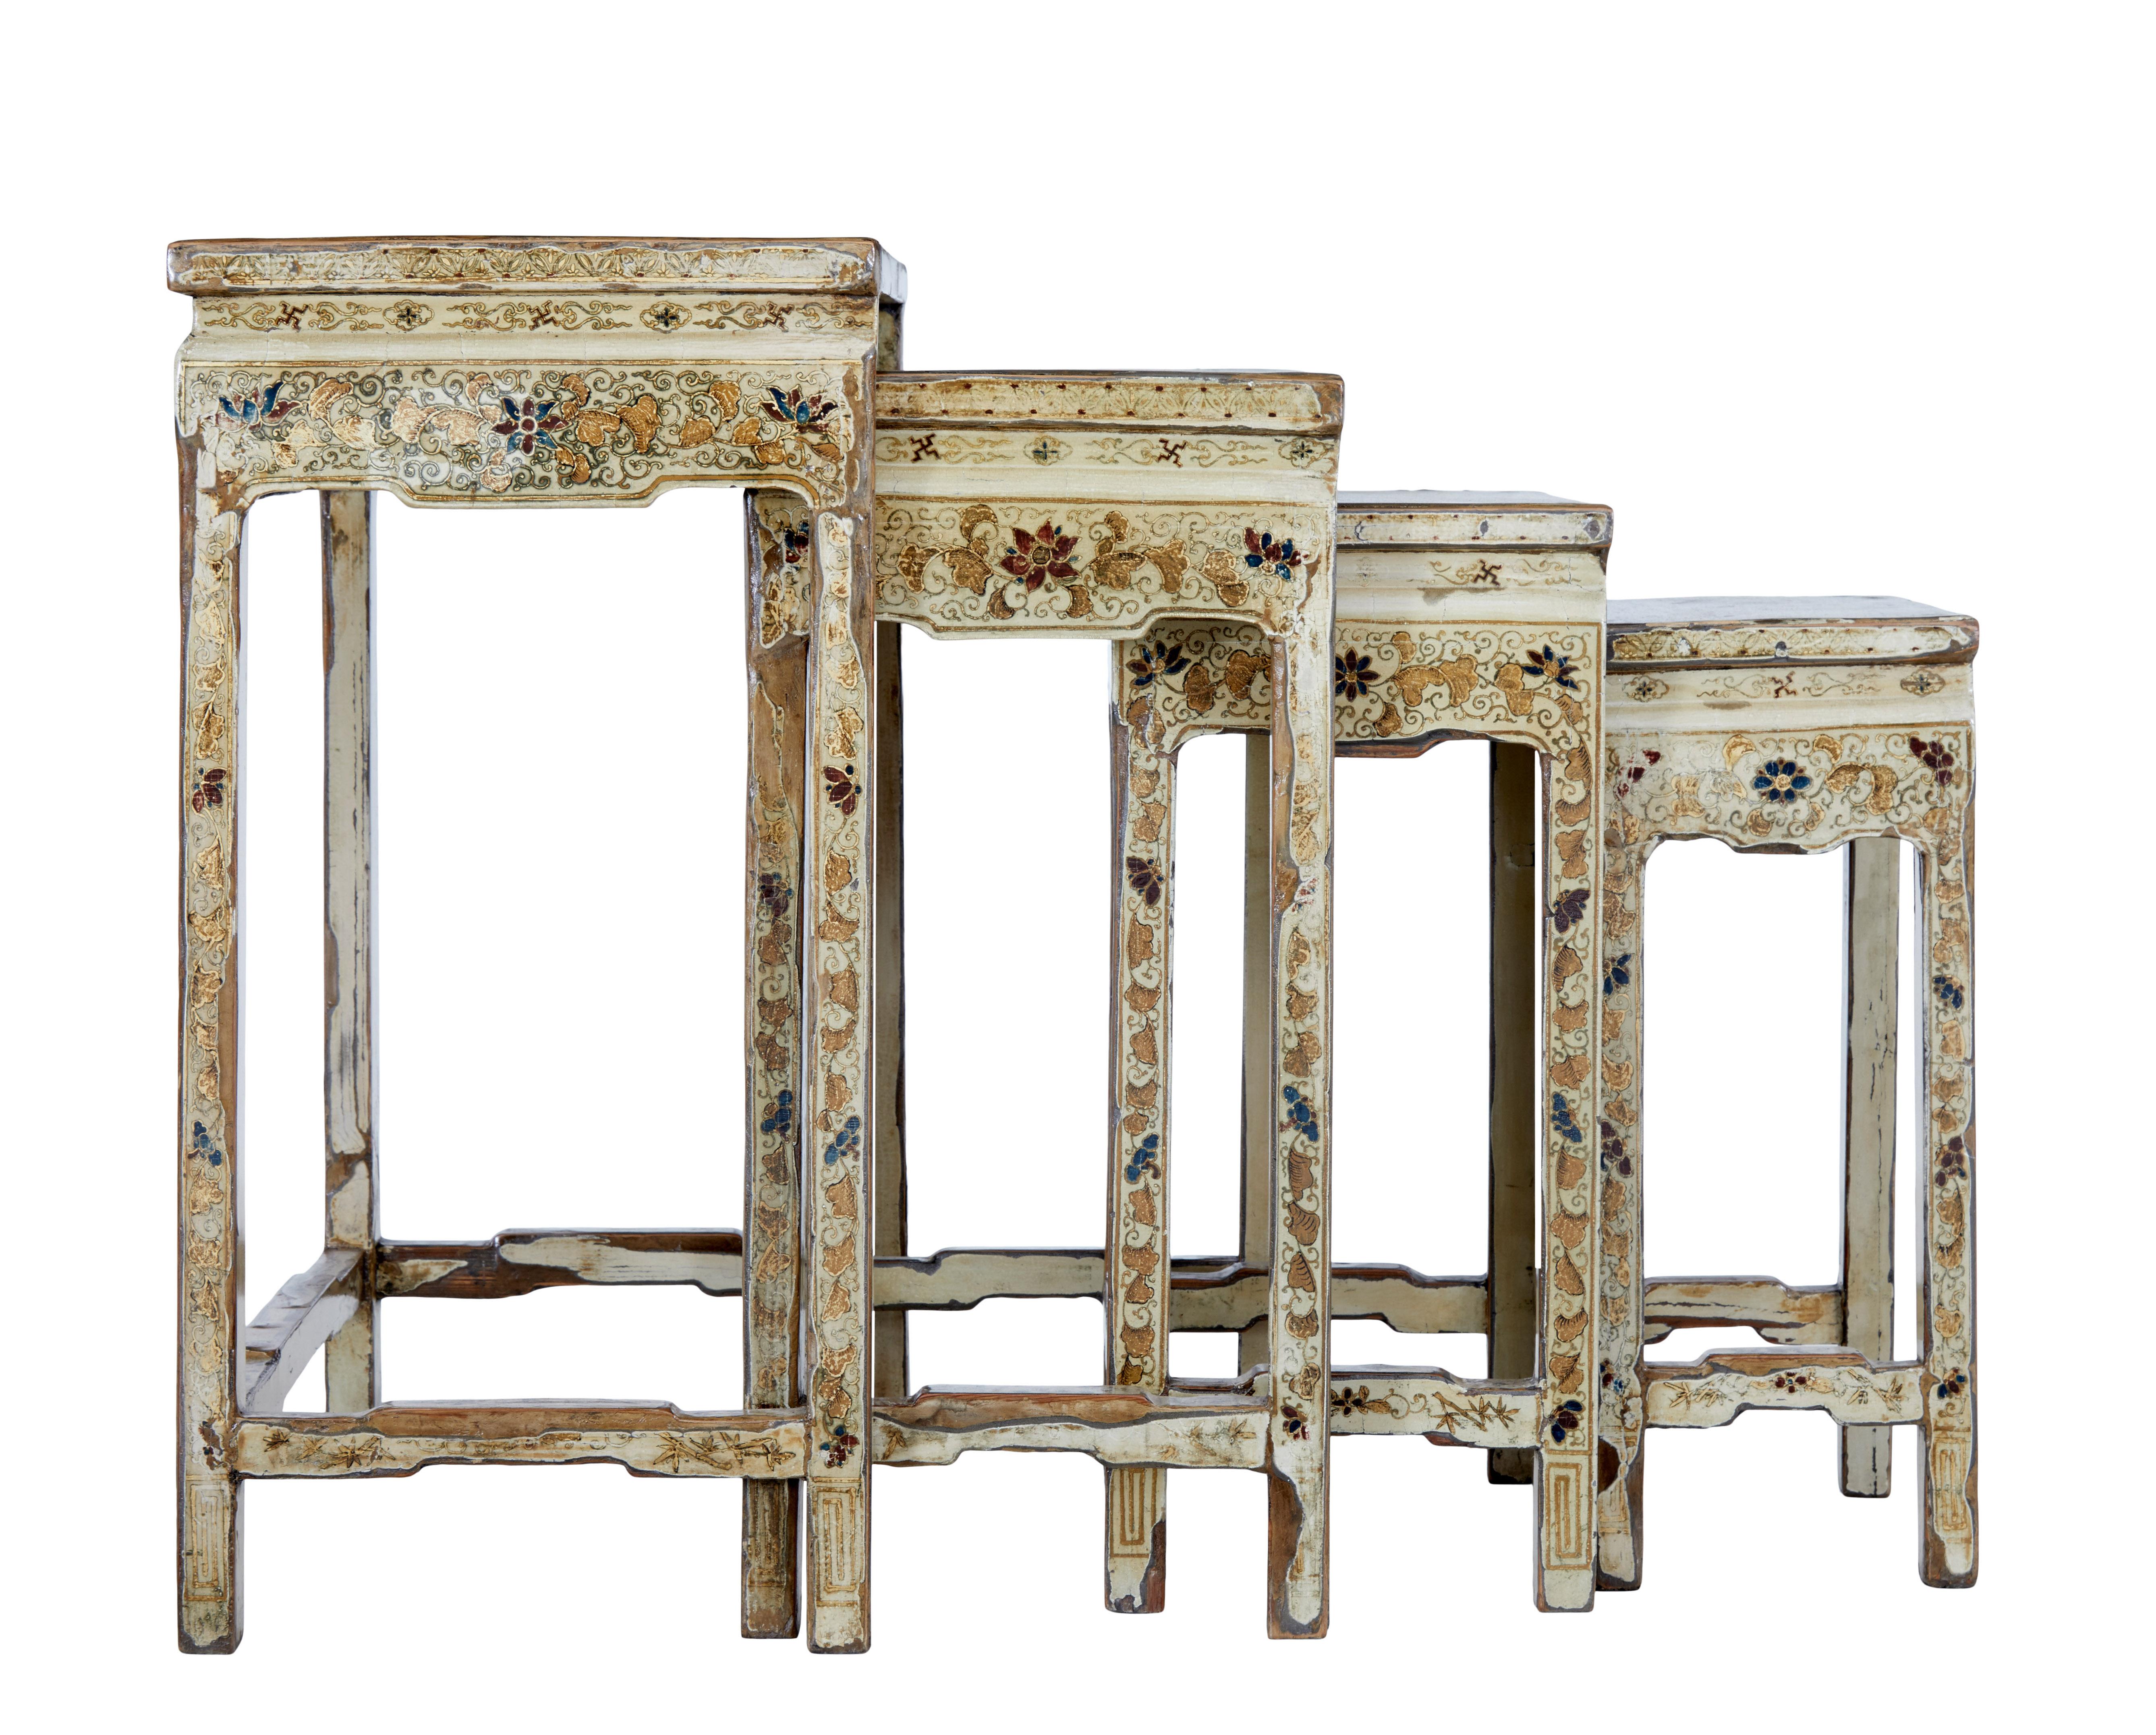 Chinese Early 20th Century Nest of 4 Lacquered and Decorated Tables